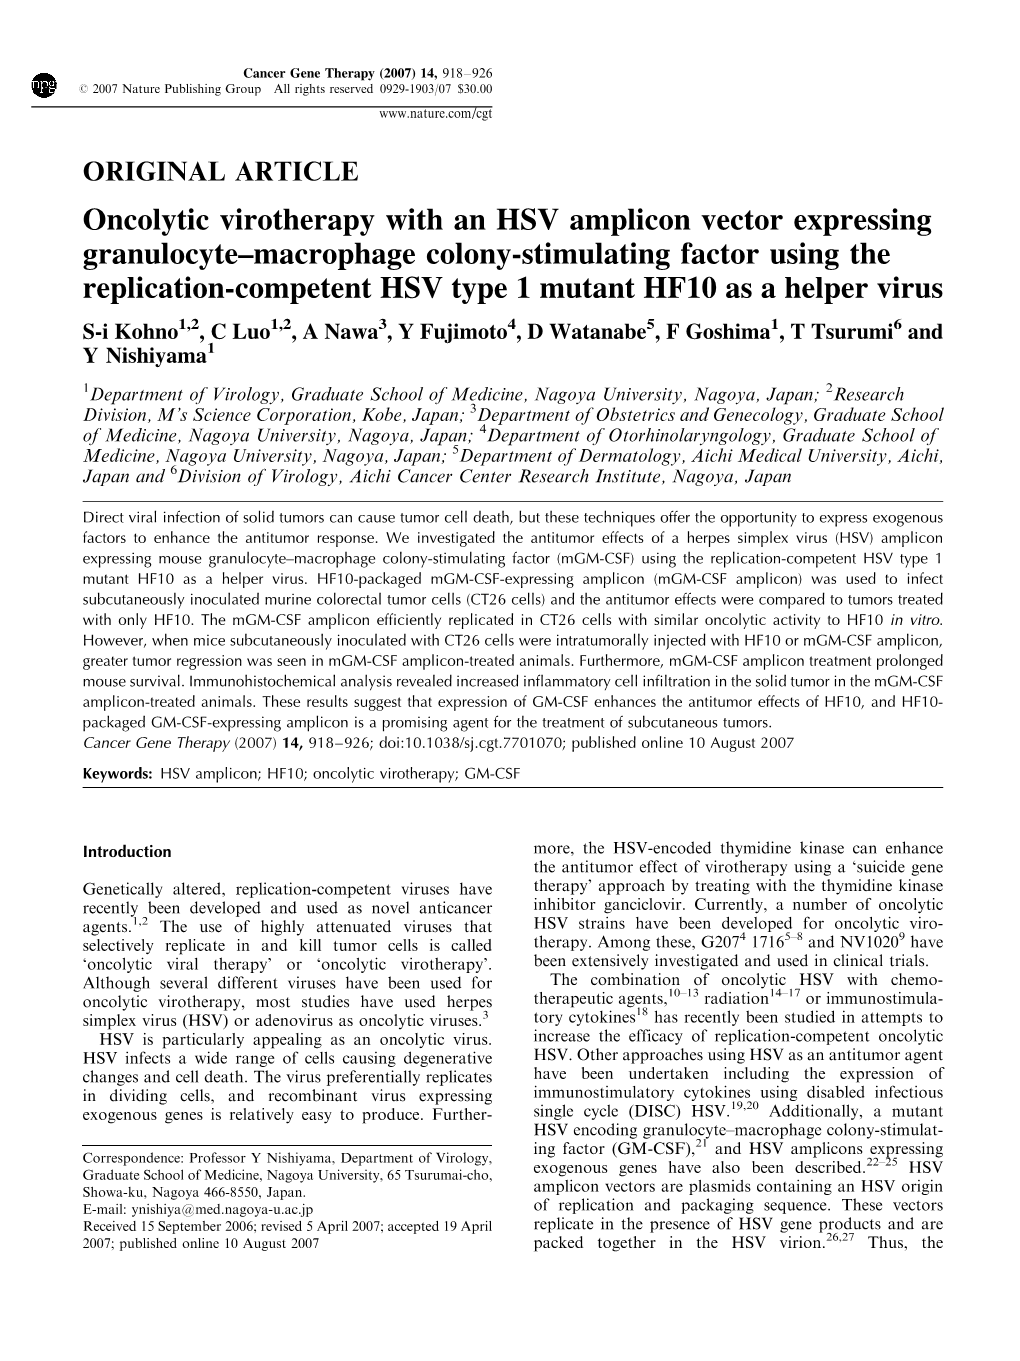 Oncolytic Virotherapy with an HSV Amplicon Vector Expressing